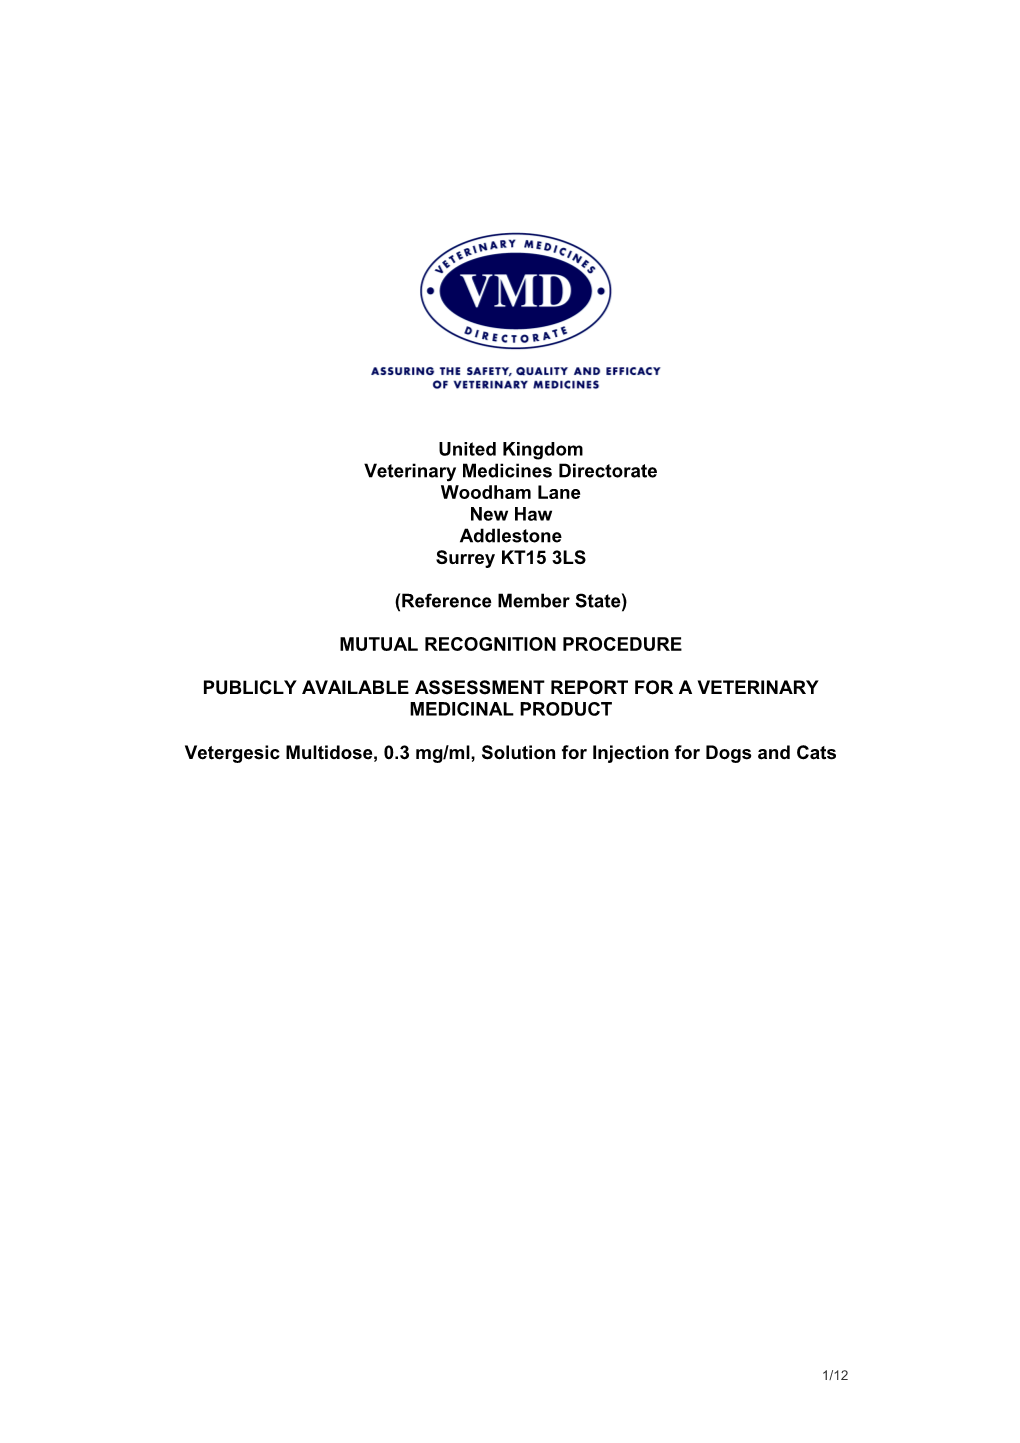 Publicly Available Assessment Report for a Veterinary Medicinal Product